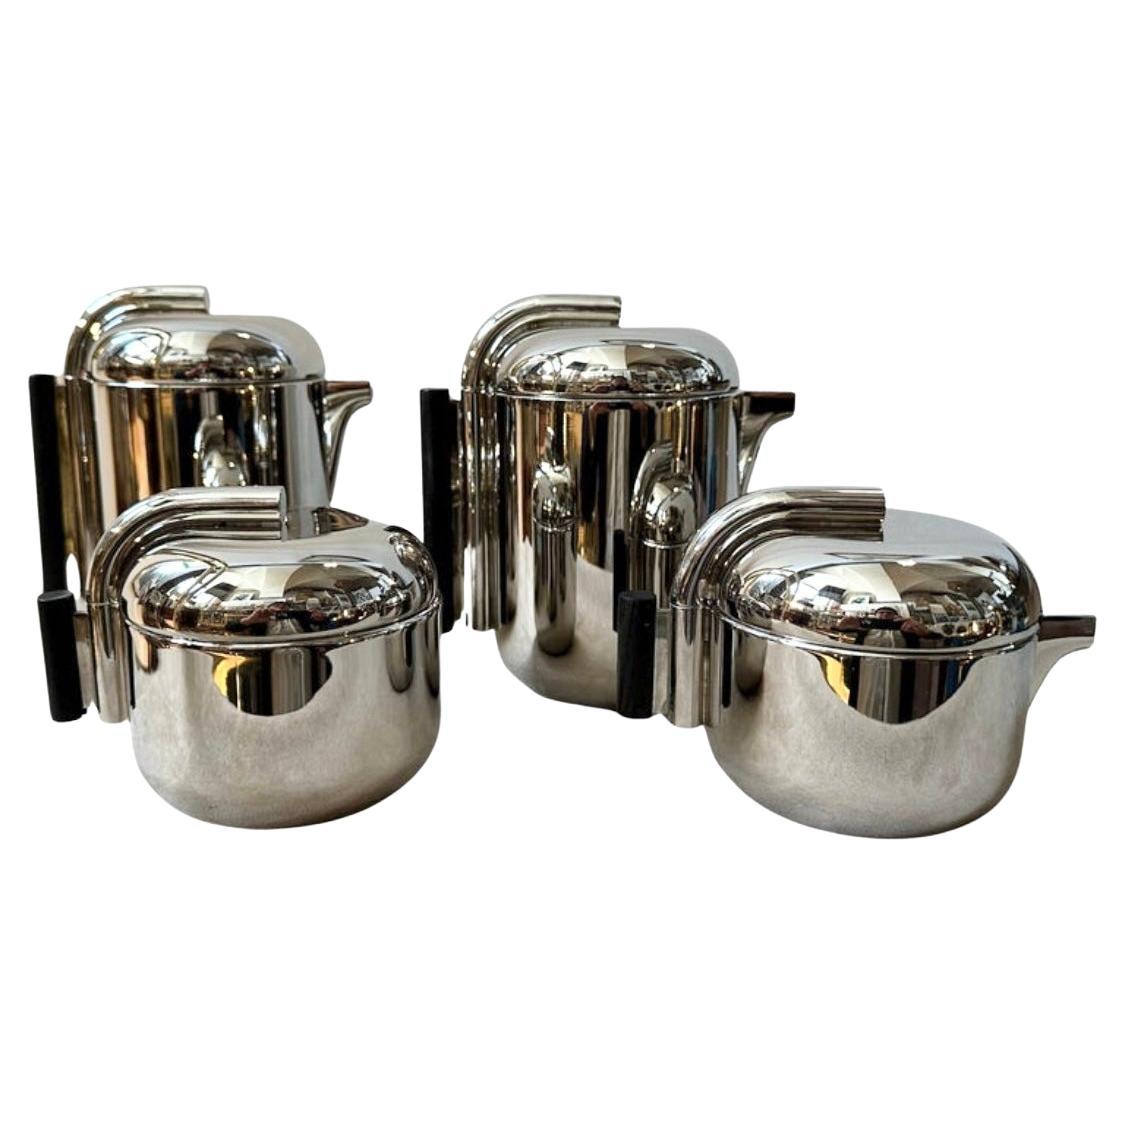 1960s Silver Plated Tea and Coffee Set Designed by G. Coarezza for Mam Milano